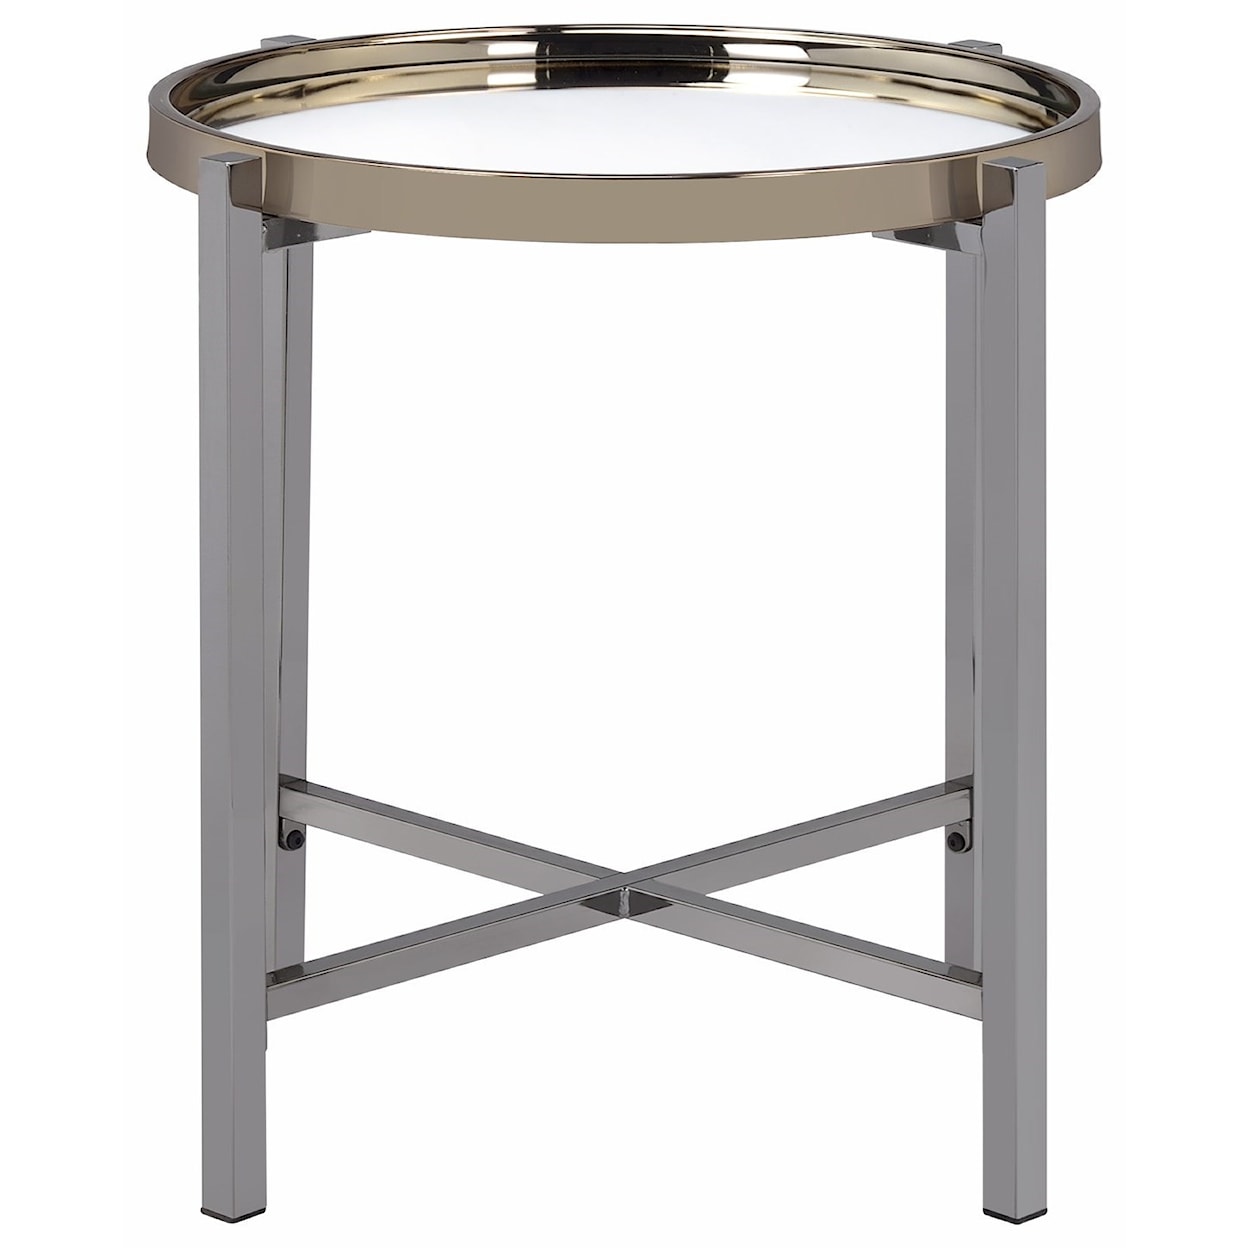 Elements International Edith Round End Table